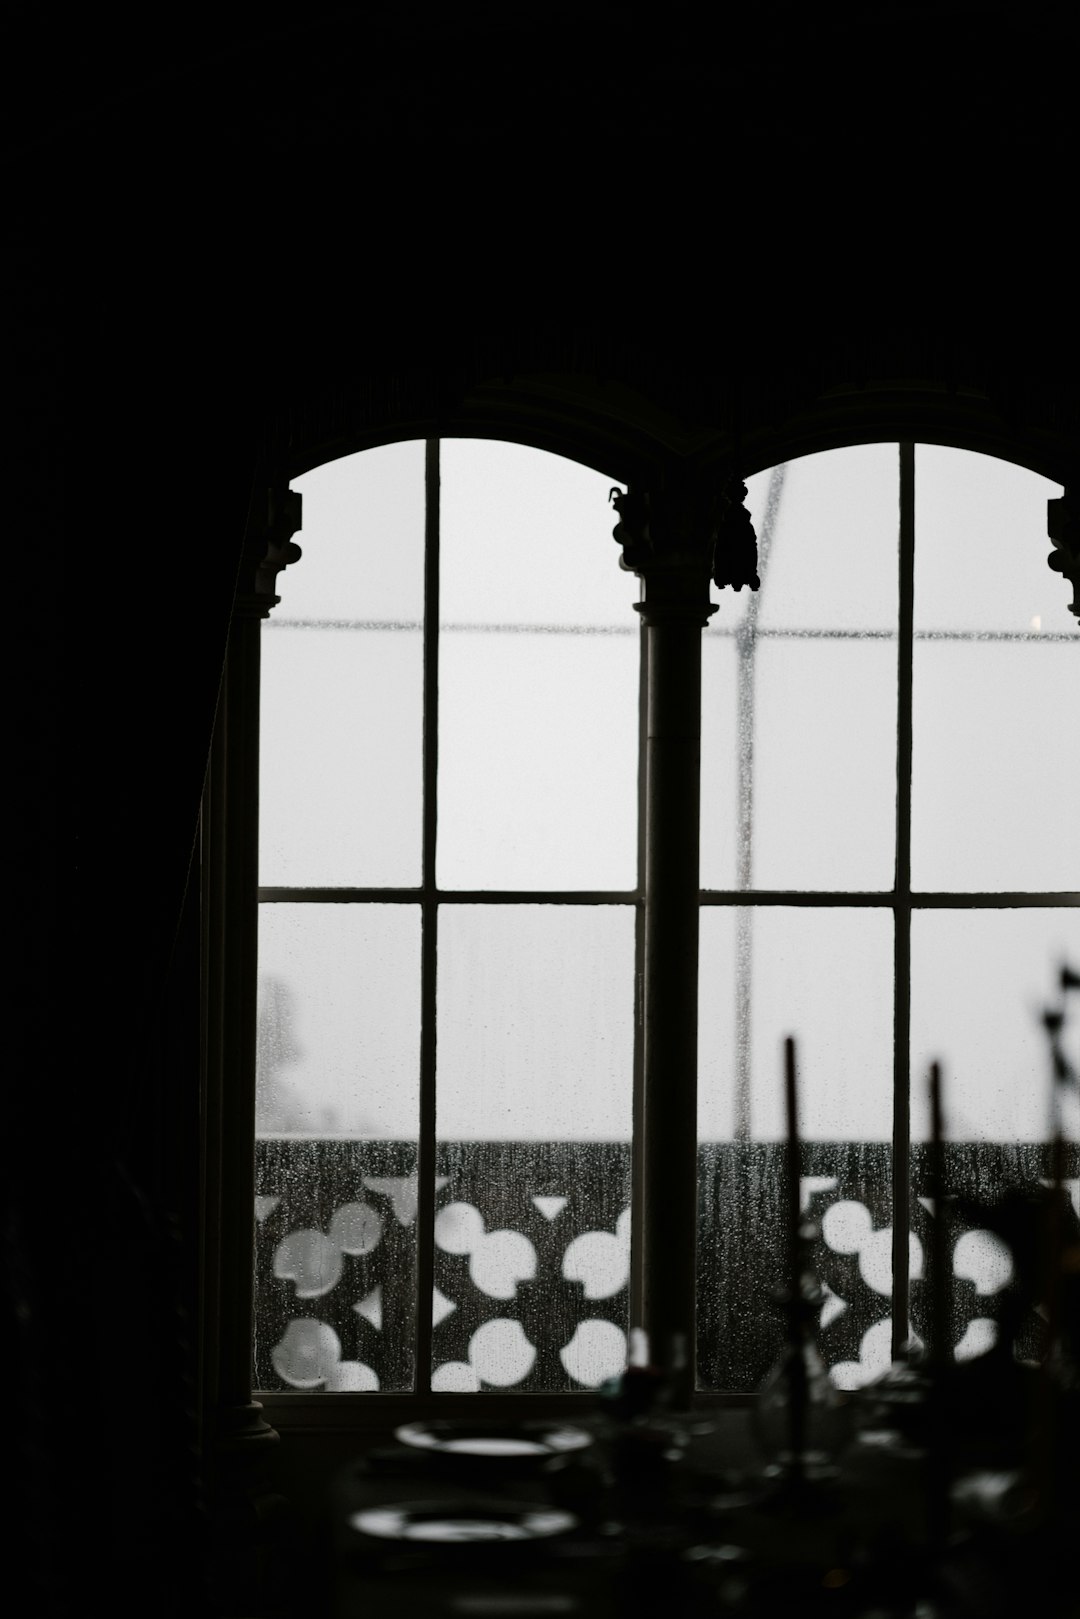 grayscale photo of closed window